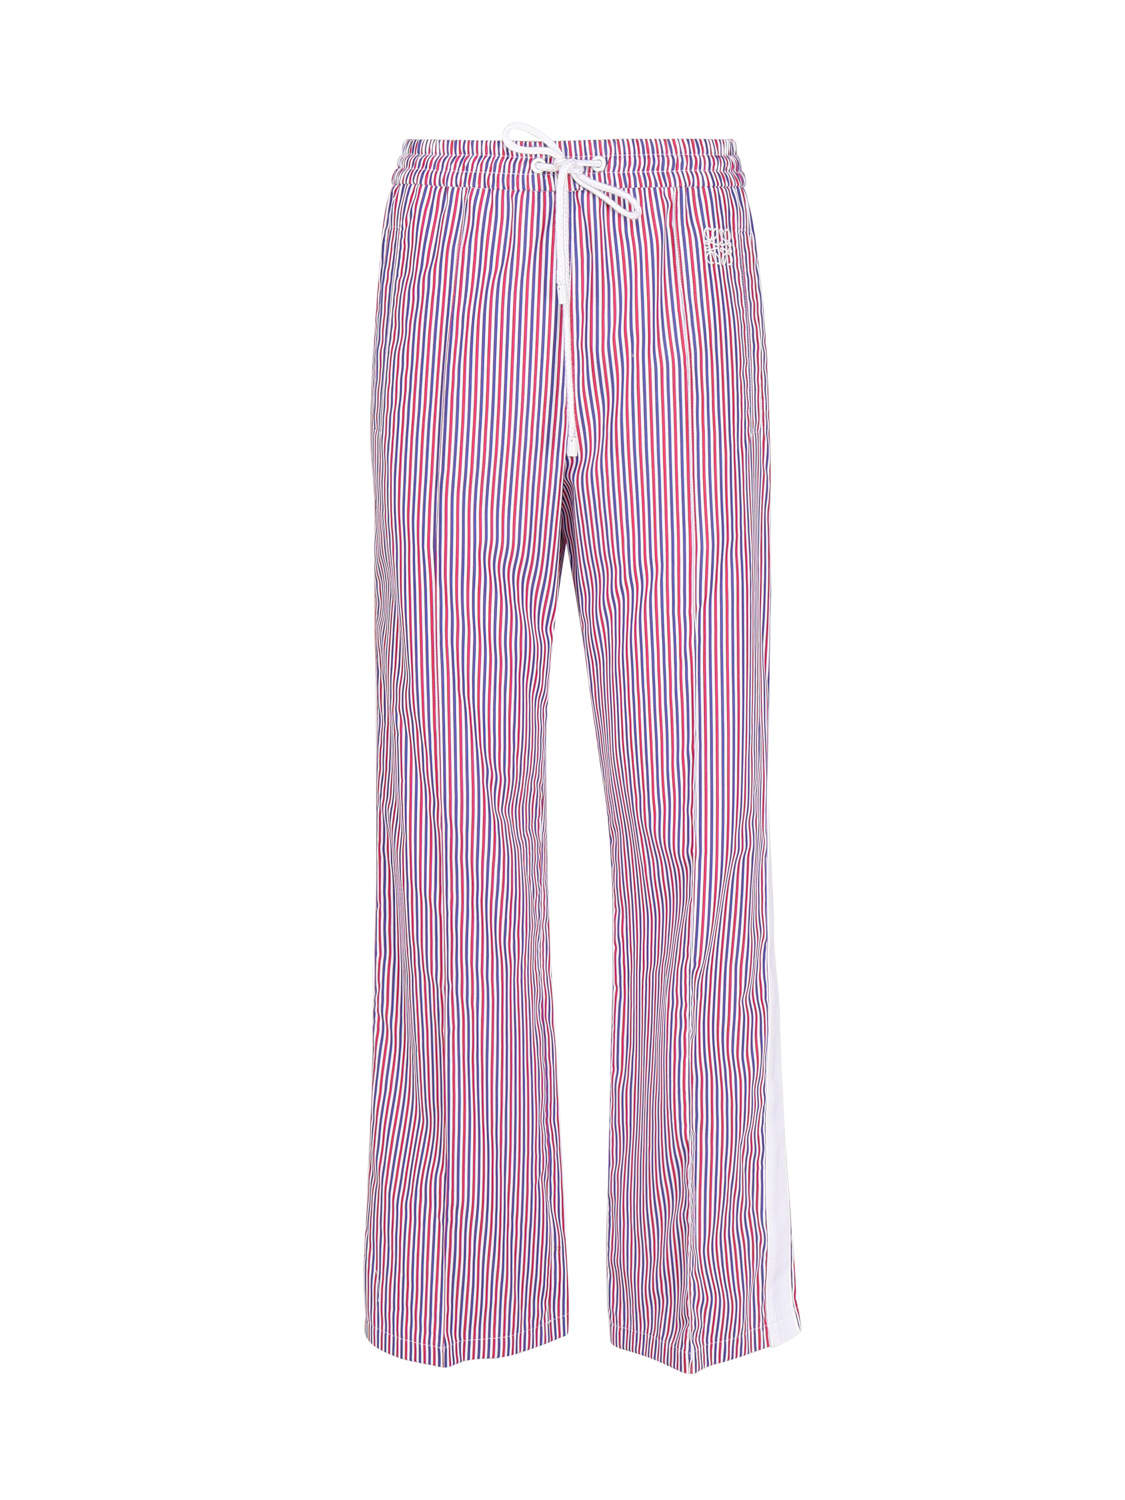 LOEWE STRIPED COTTON TRACKSUIT TROUSERS